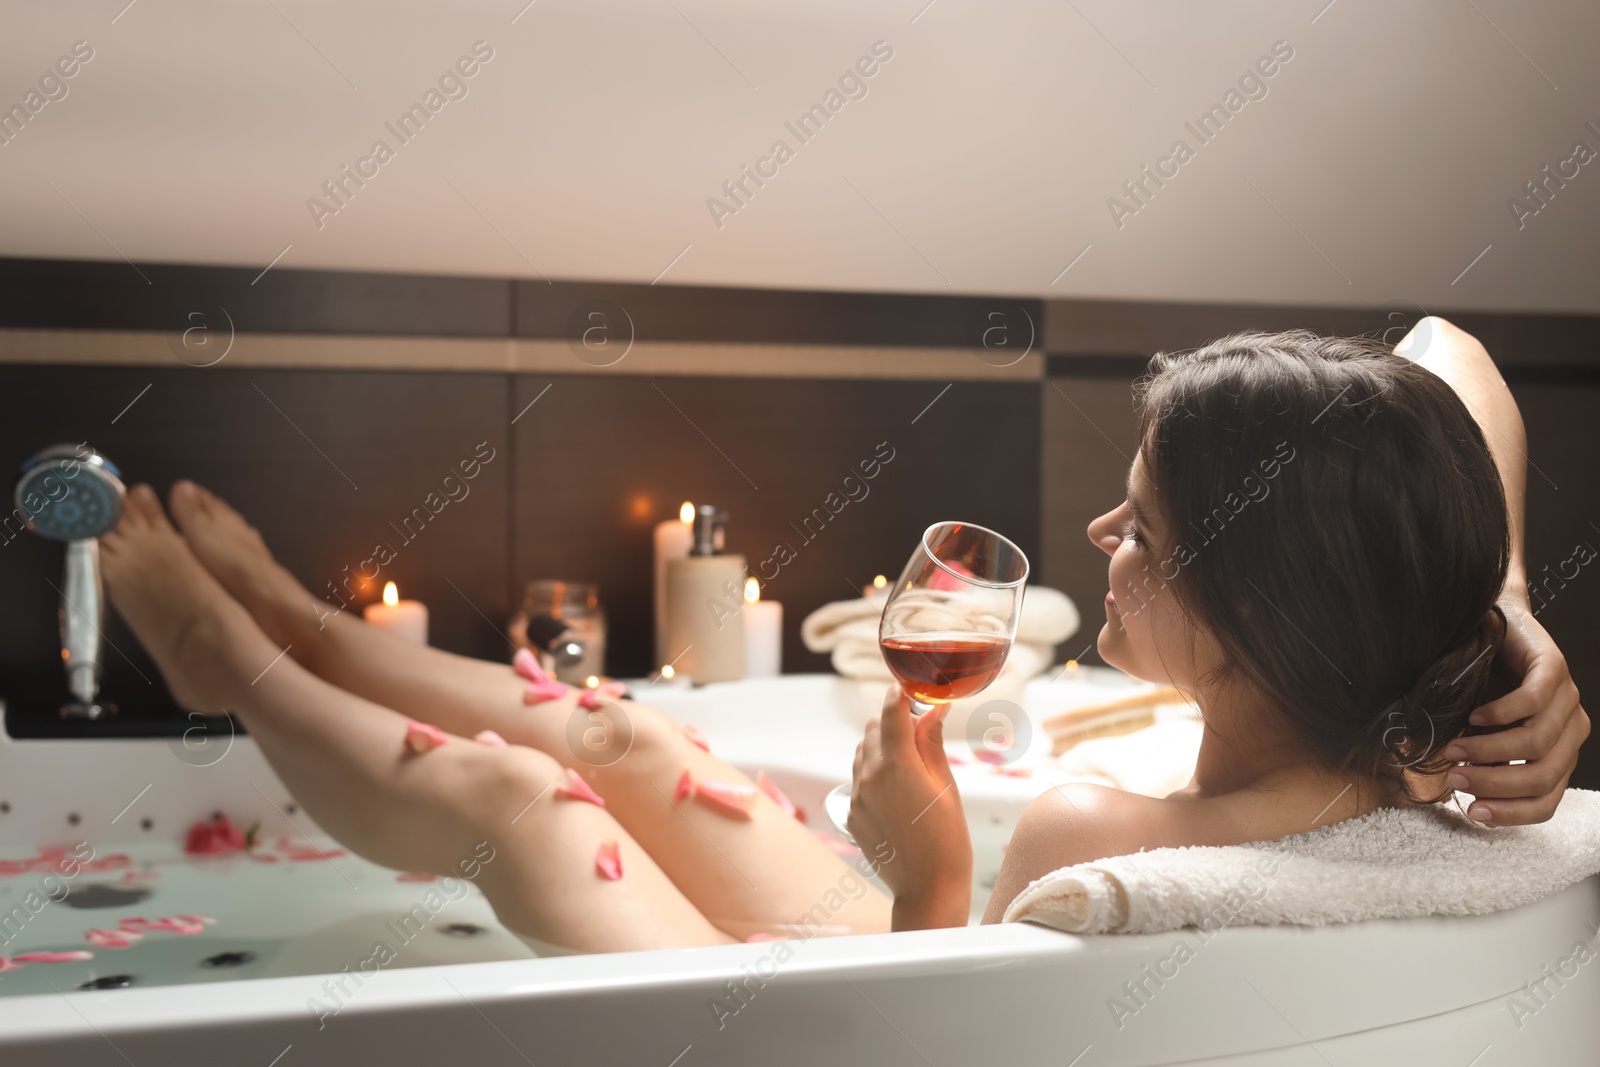 Photo of Woman holding glass of wine while taking bath with rose petals. Romantic atmosphere